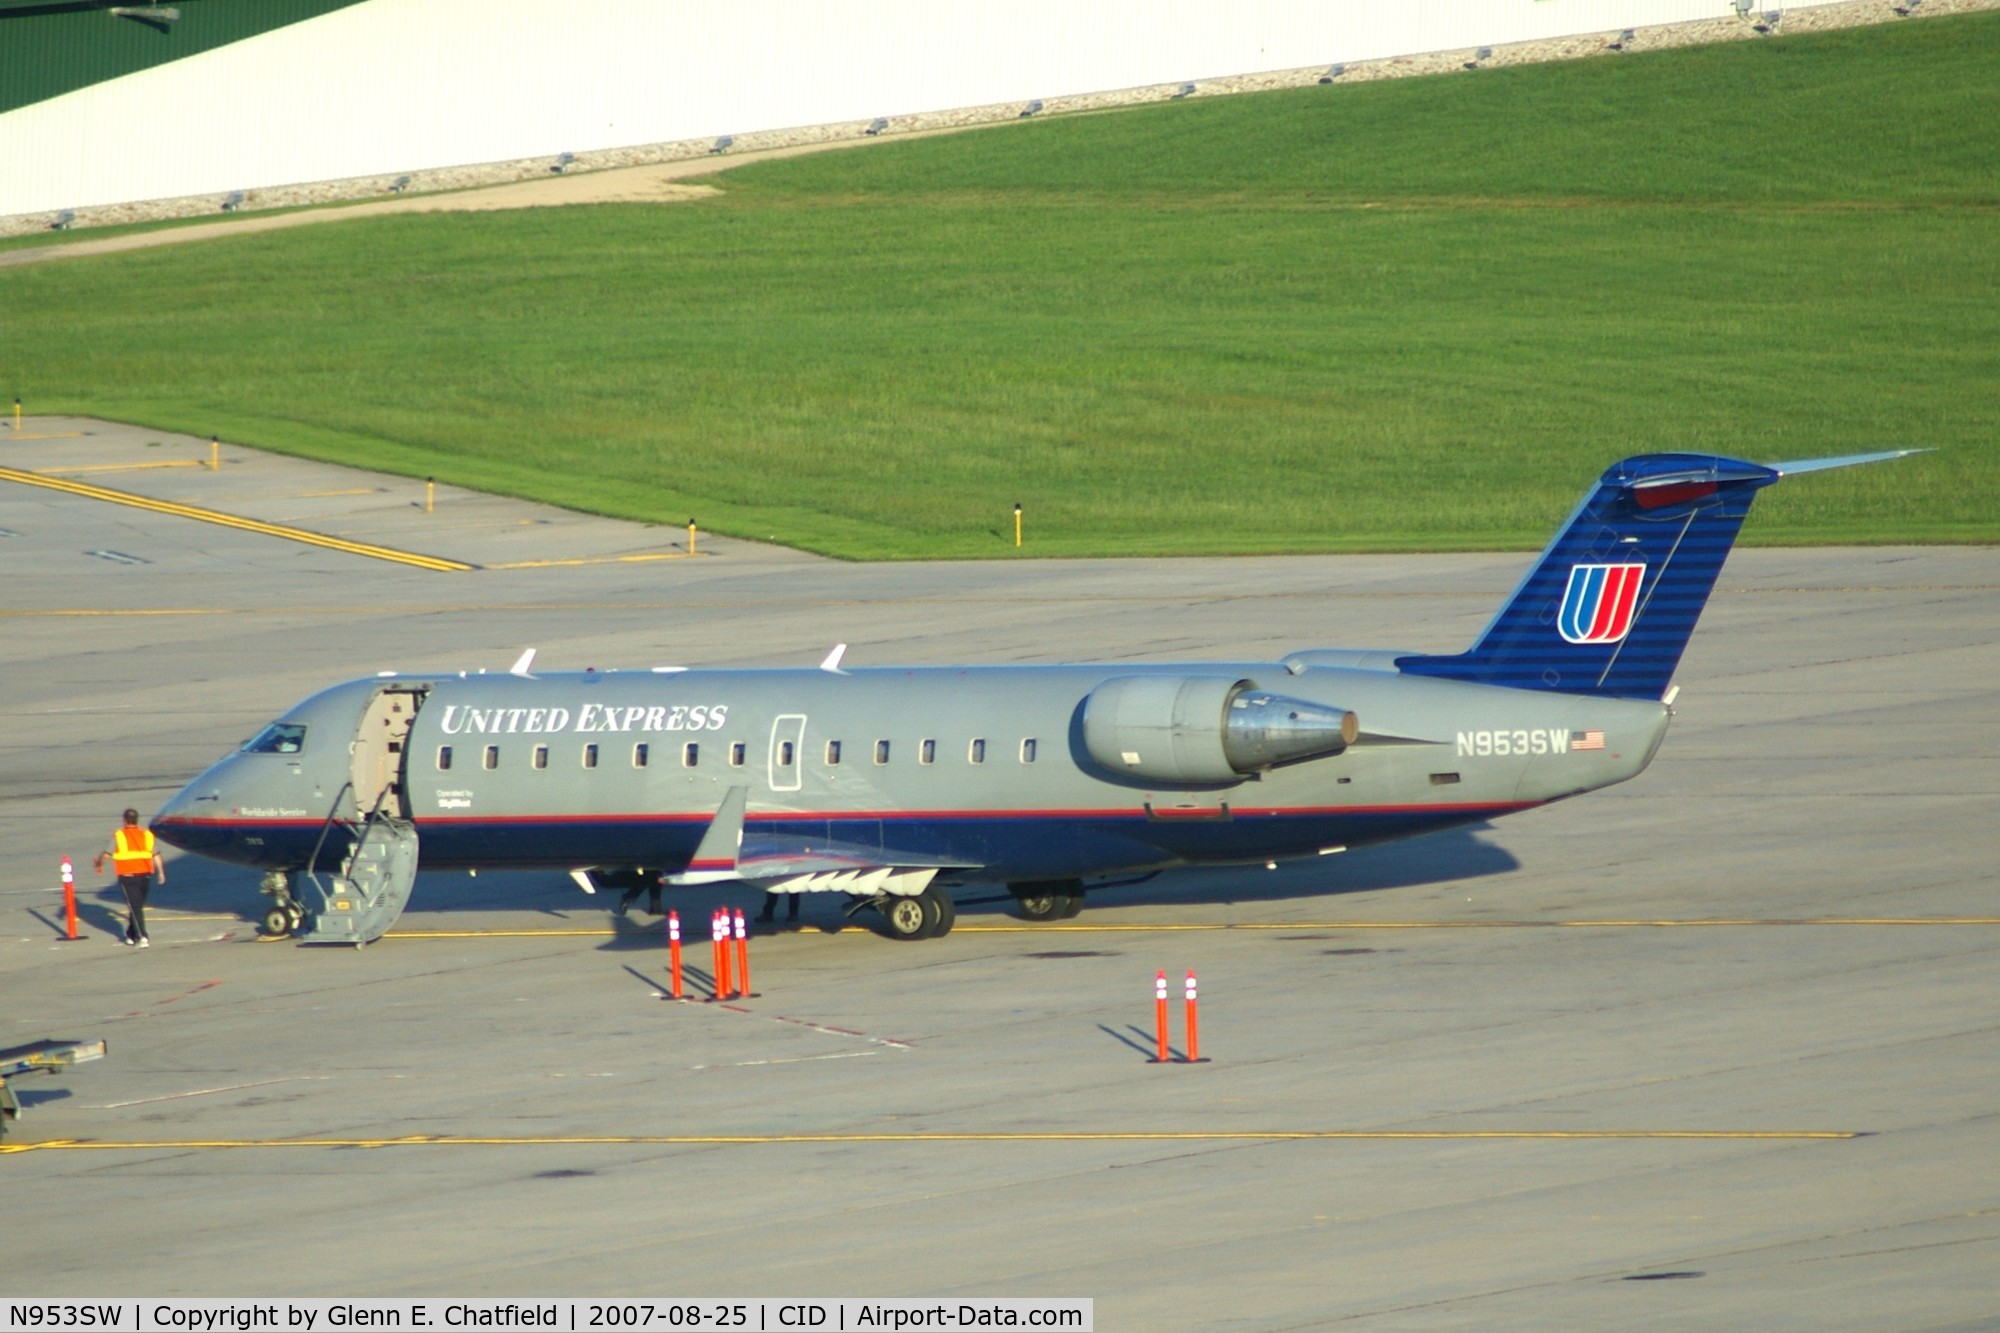 N953SW, 2003 Bombardier CRJ-200LR (CL-600-2B19) C/N 7813, All packed up and ready to close the door